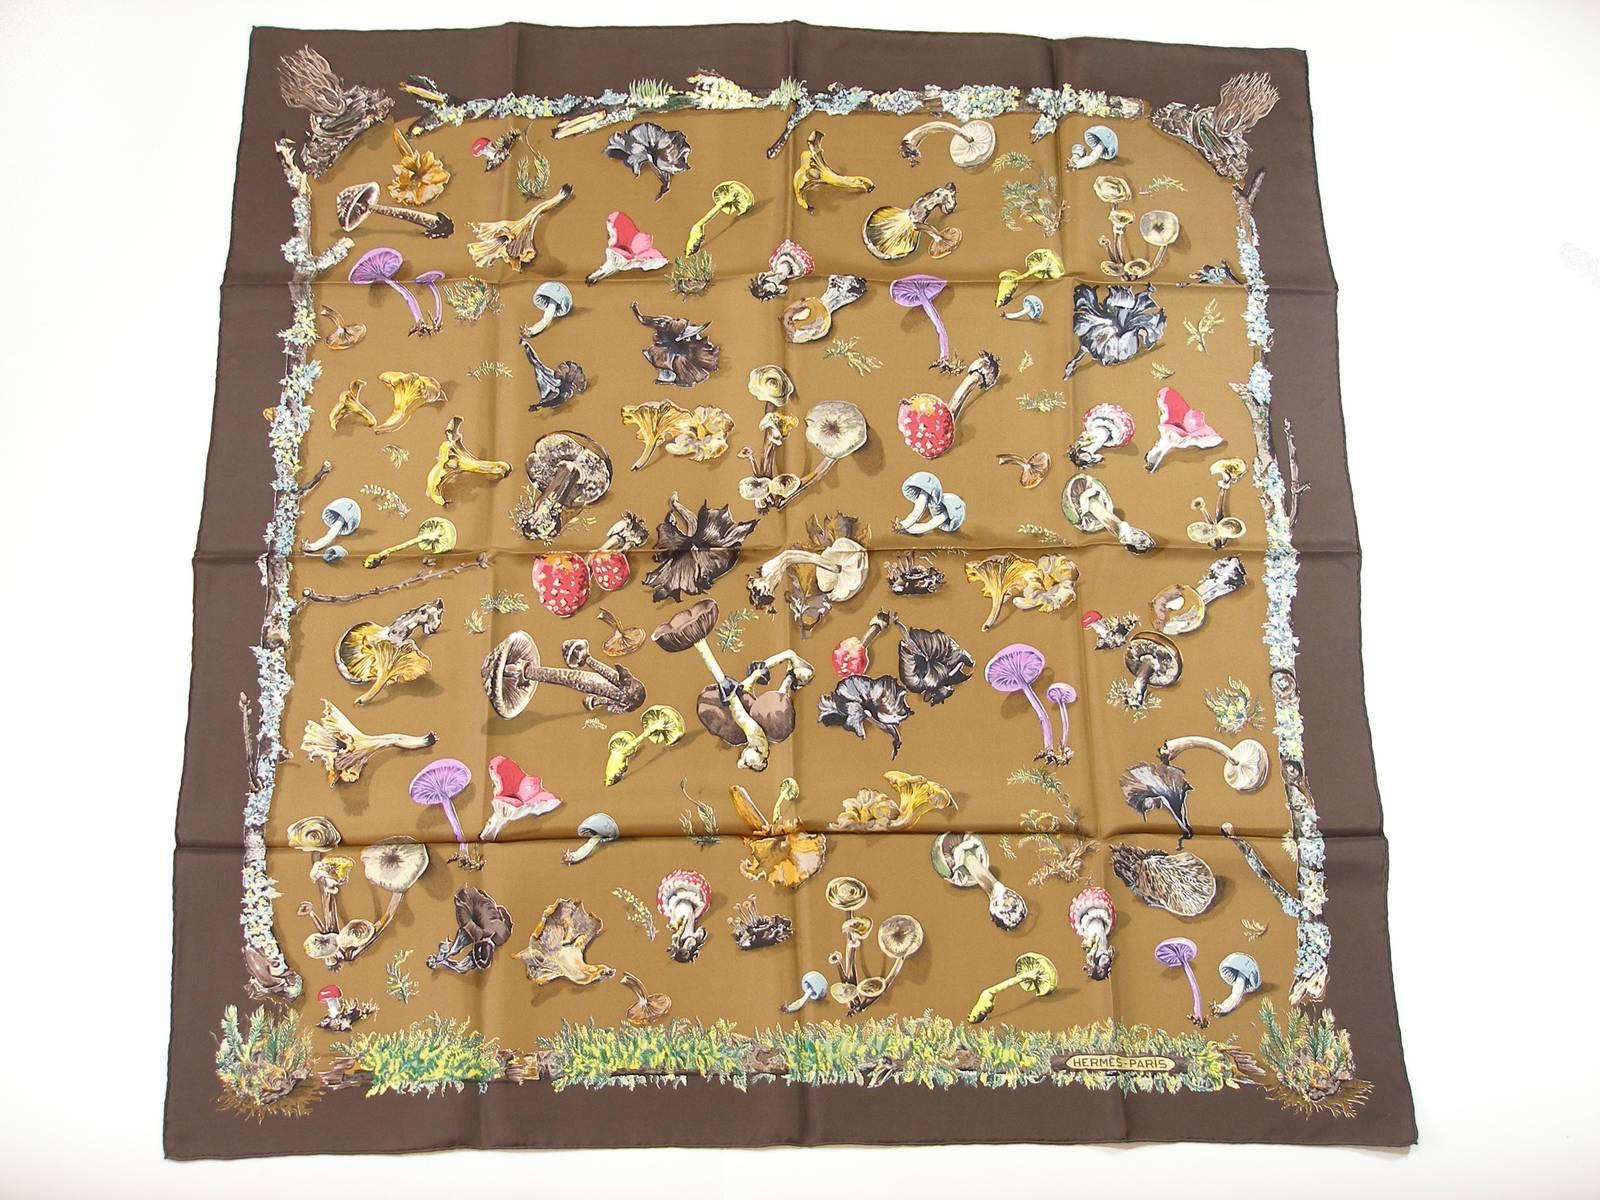 Ultra Collector / Rare
Hermès Les Champignons Vintage Scarf 
Brown / Crème color 
By GAVARNI & PERRIERE 
Year of creation : 1959 
Size : 90 x 90 cm 
Never worn but with a tiny stain on the back  
Please note for this purchase :
Small stain on the